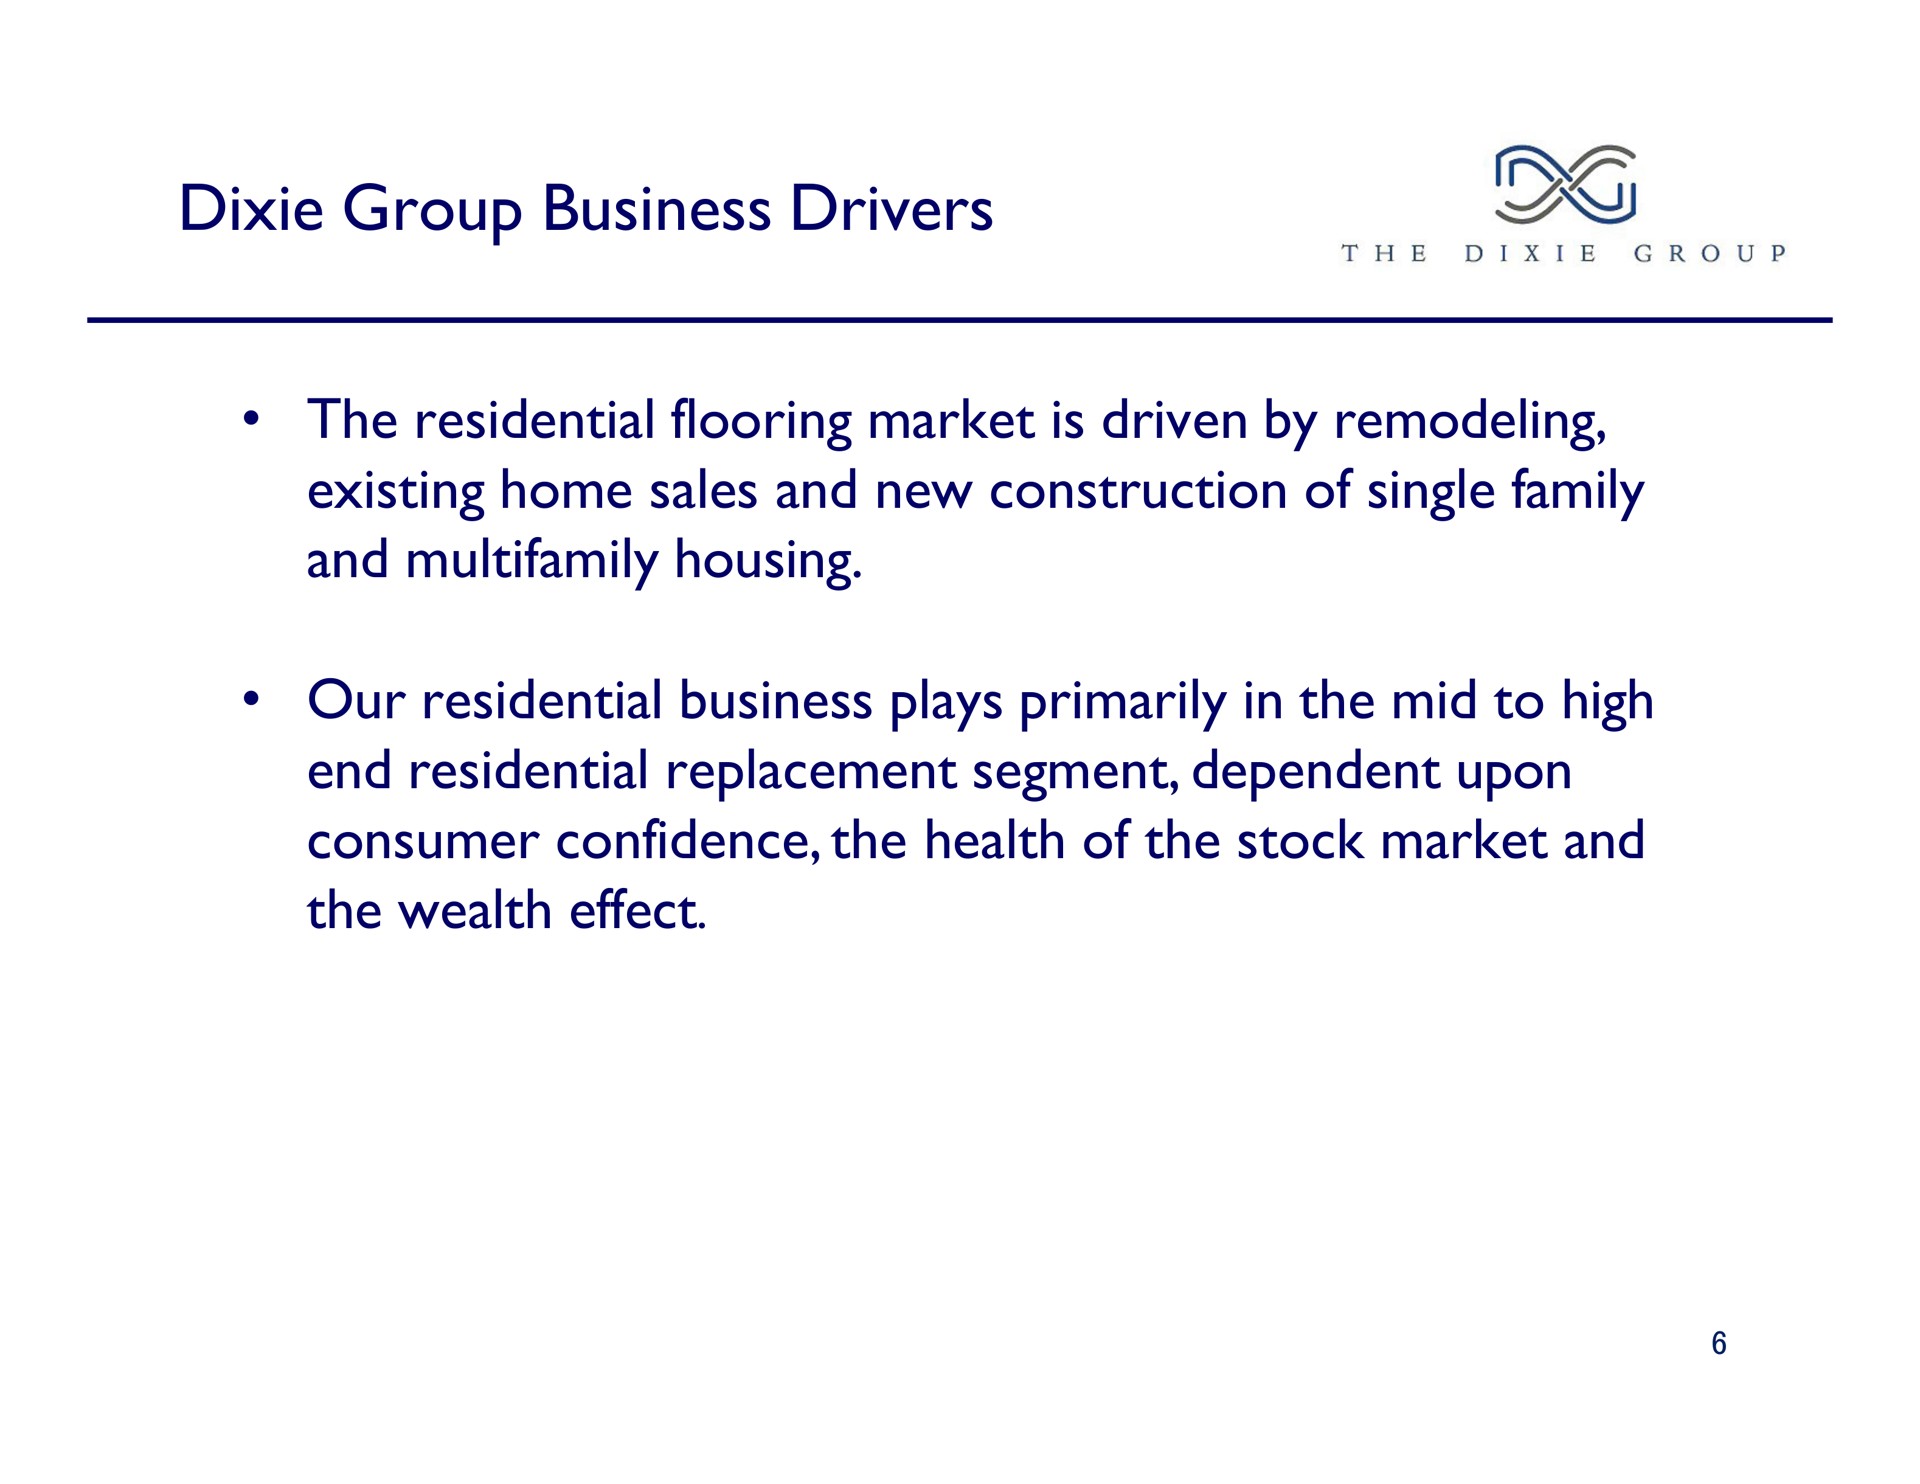 dixie group business drivers existing home sales and new construction of single family and housing | The Dixie Group